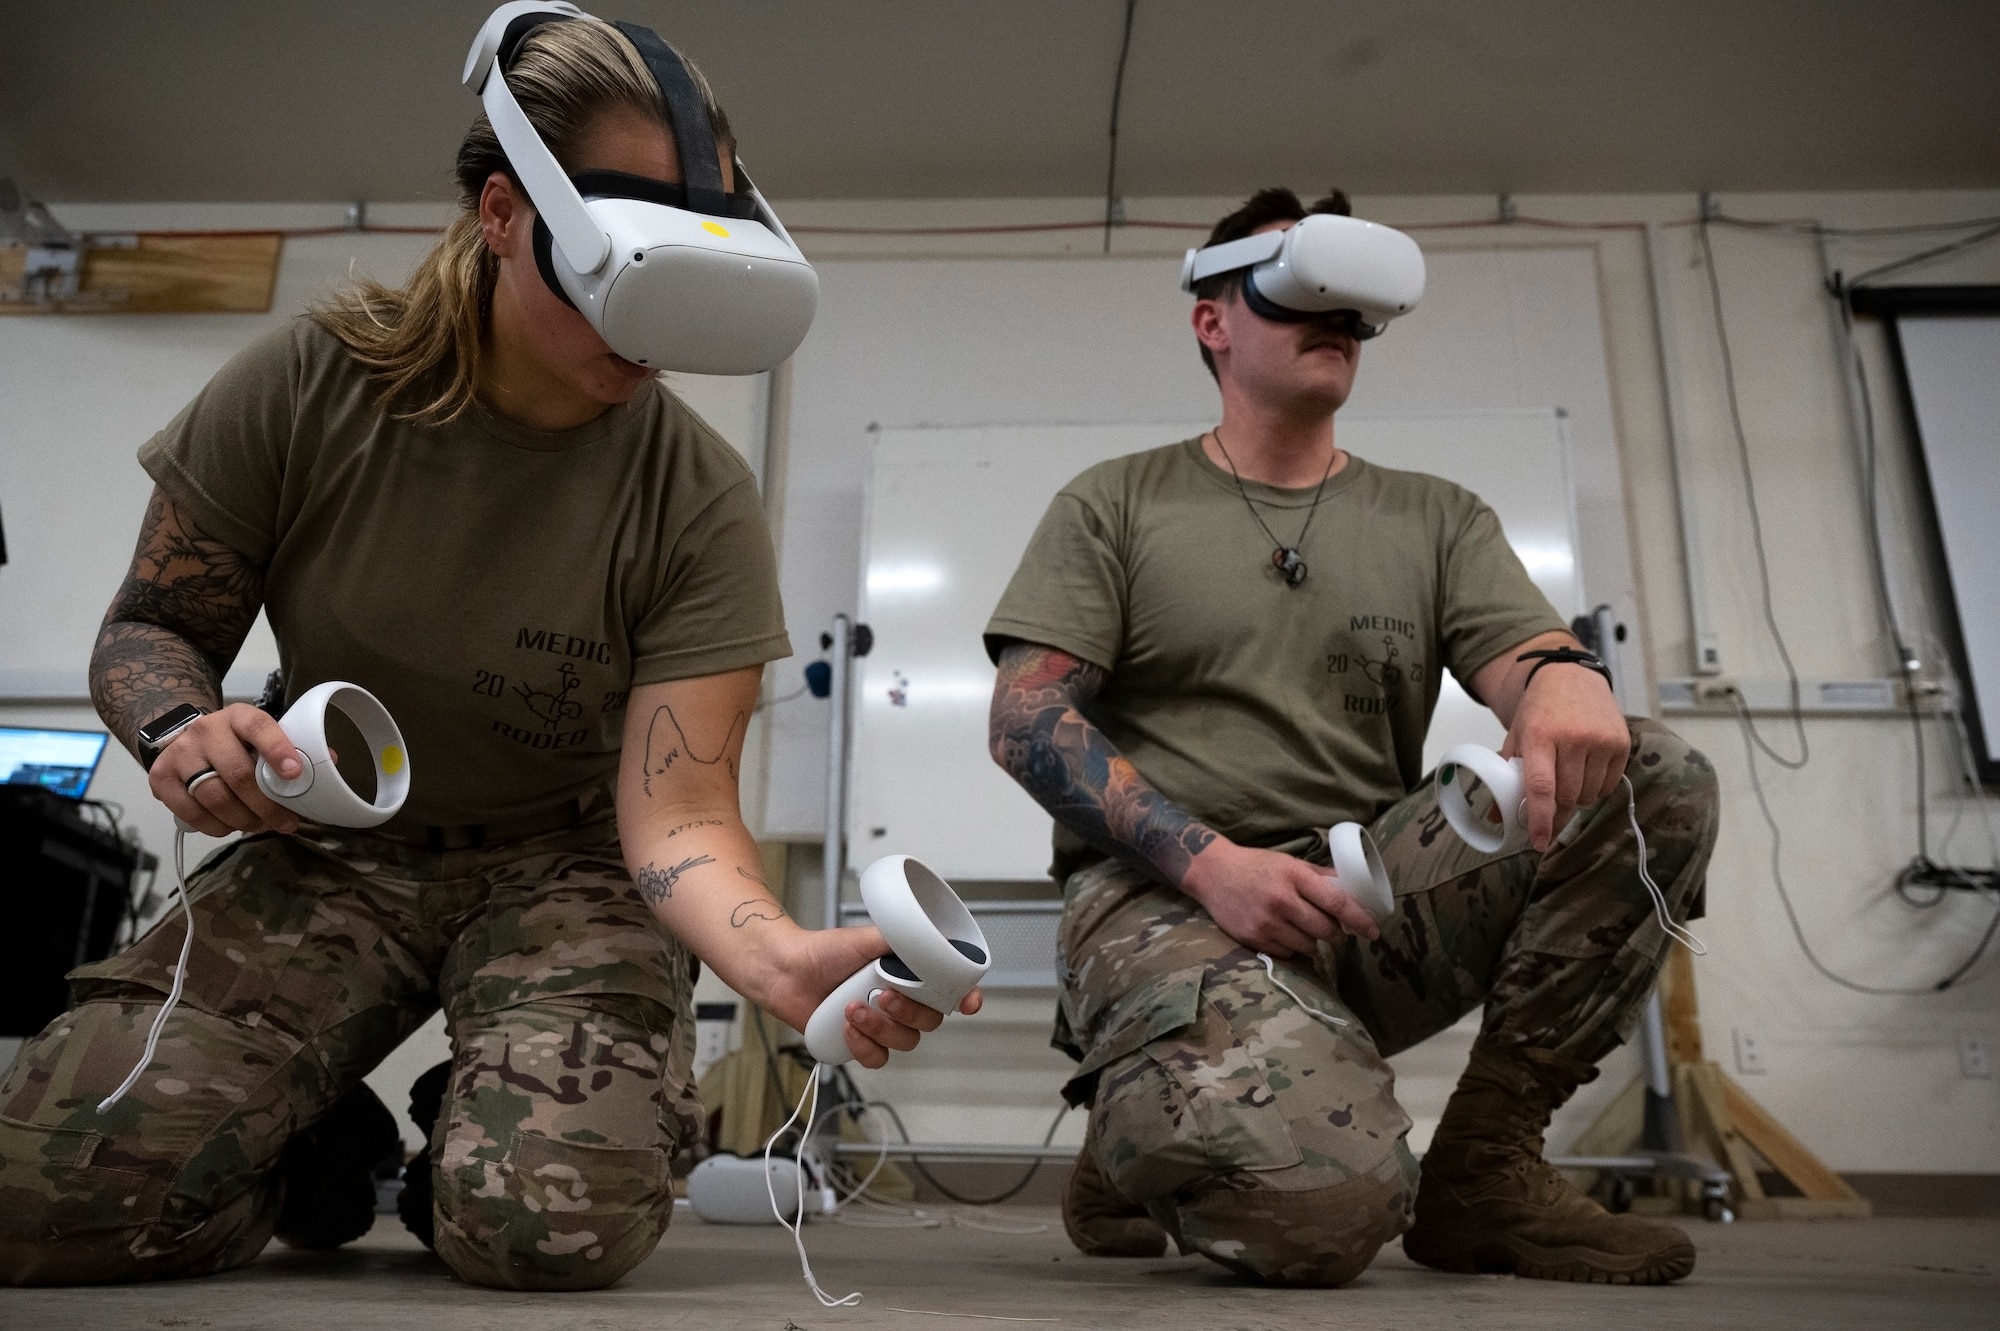 A man and woman in military uniform kneel on the ground and use goggles and remotes to see a virtual scene in front of them.